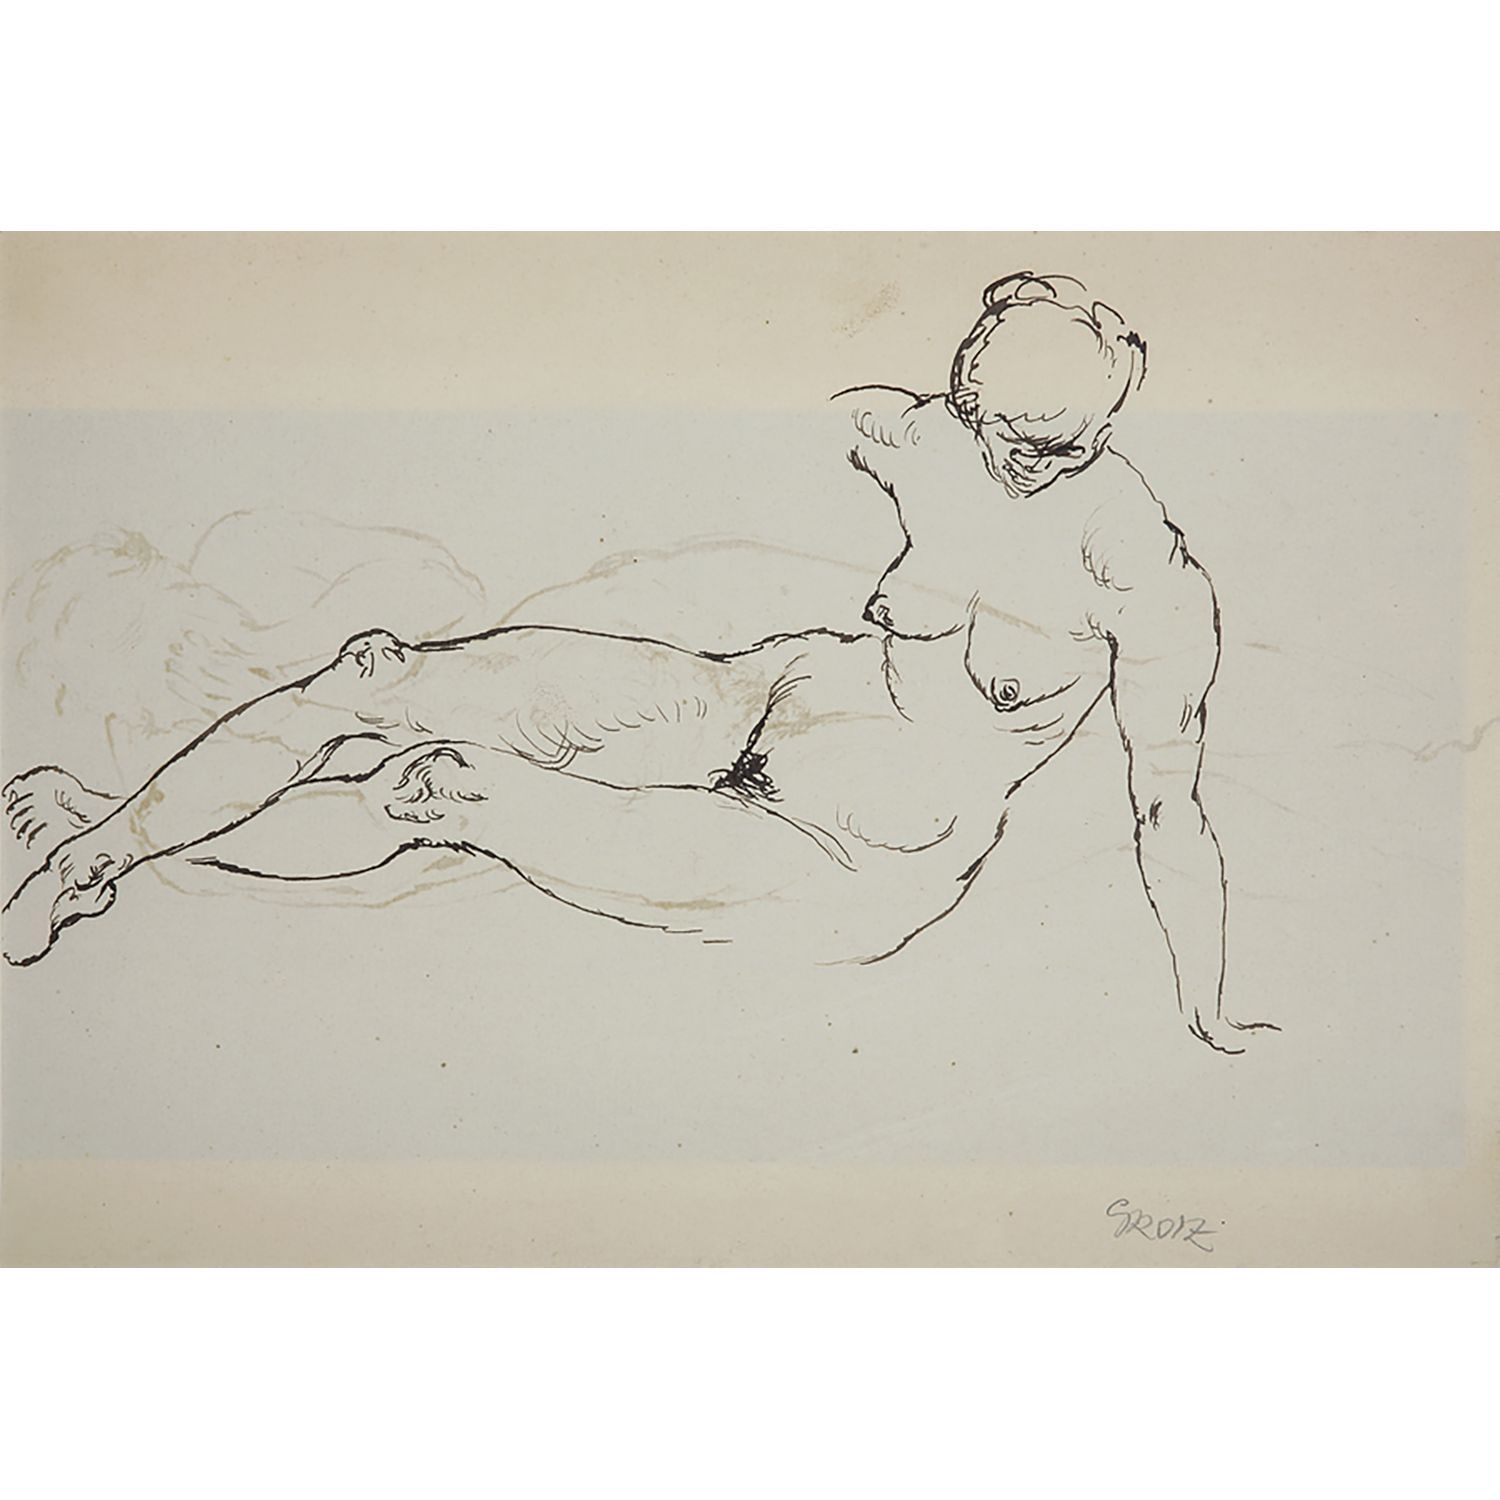 Null GEORGES GROSZ (1893-1959)

STUDIES FOR FEMALE NUDE

Double-sided drawing

I&hellip;